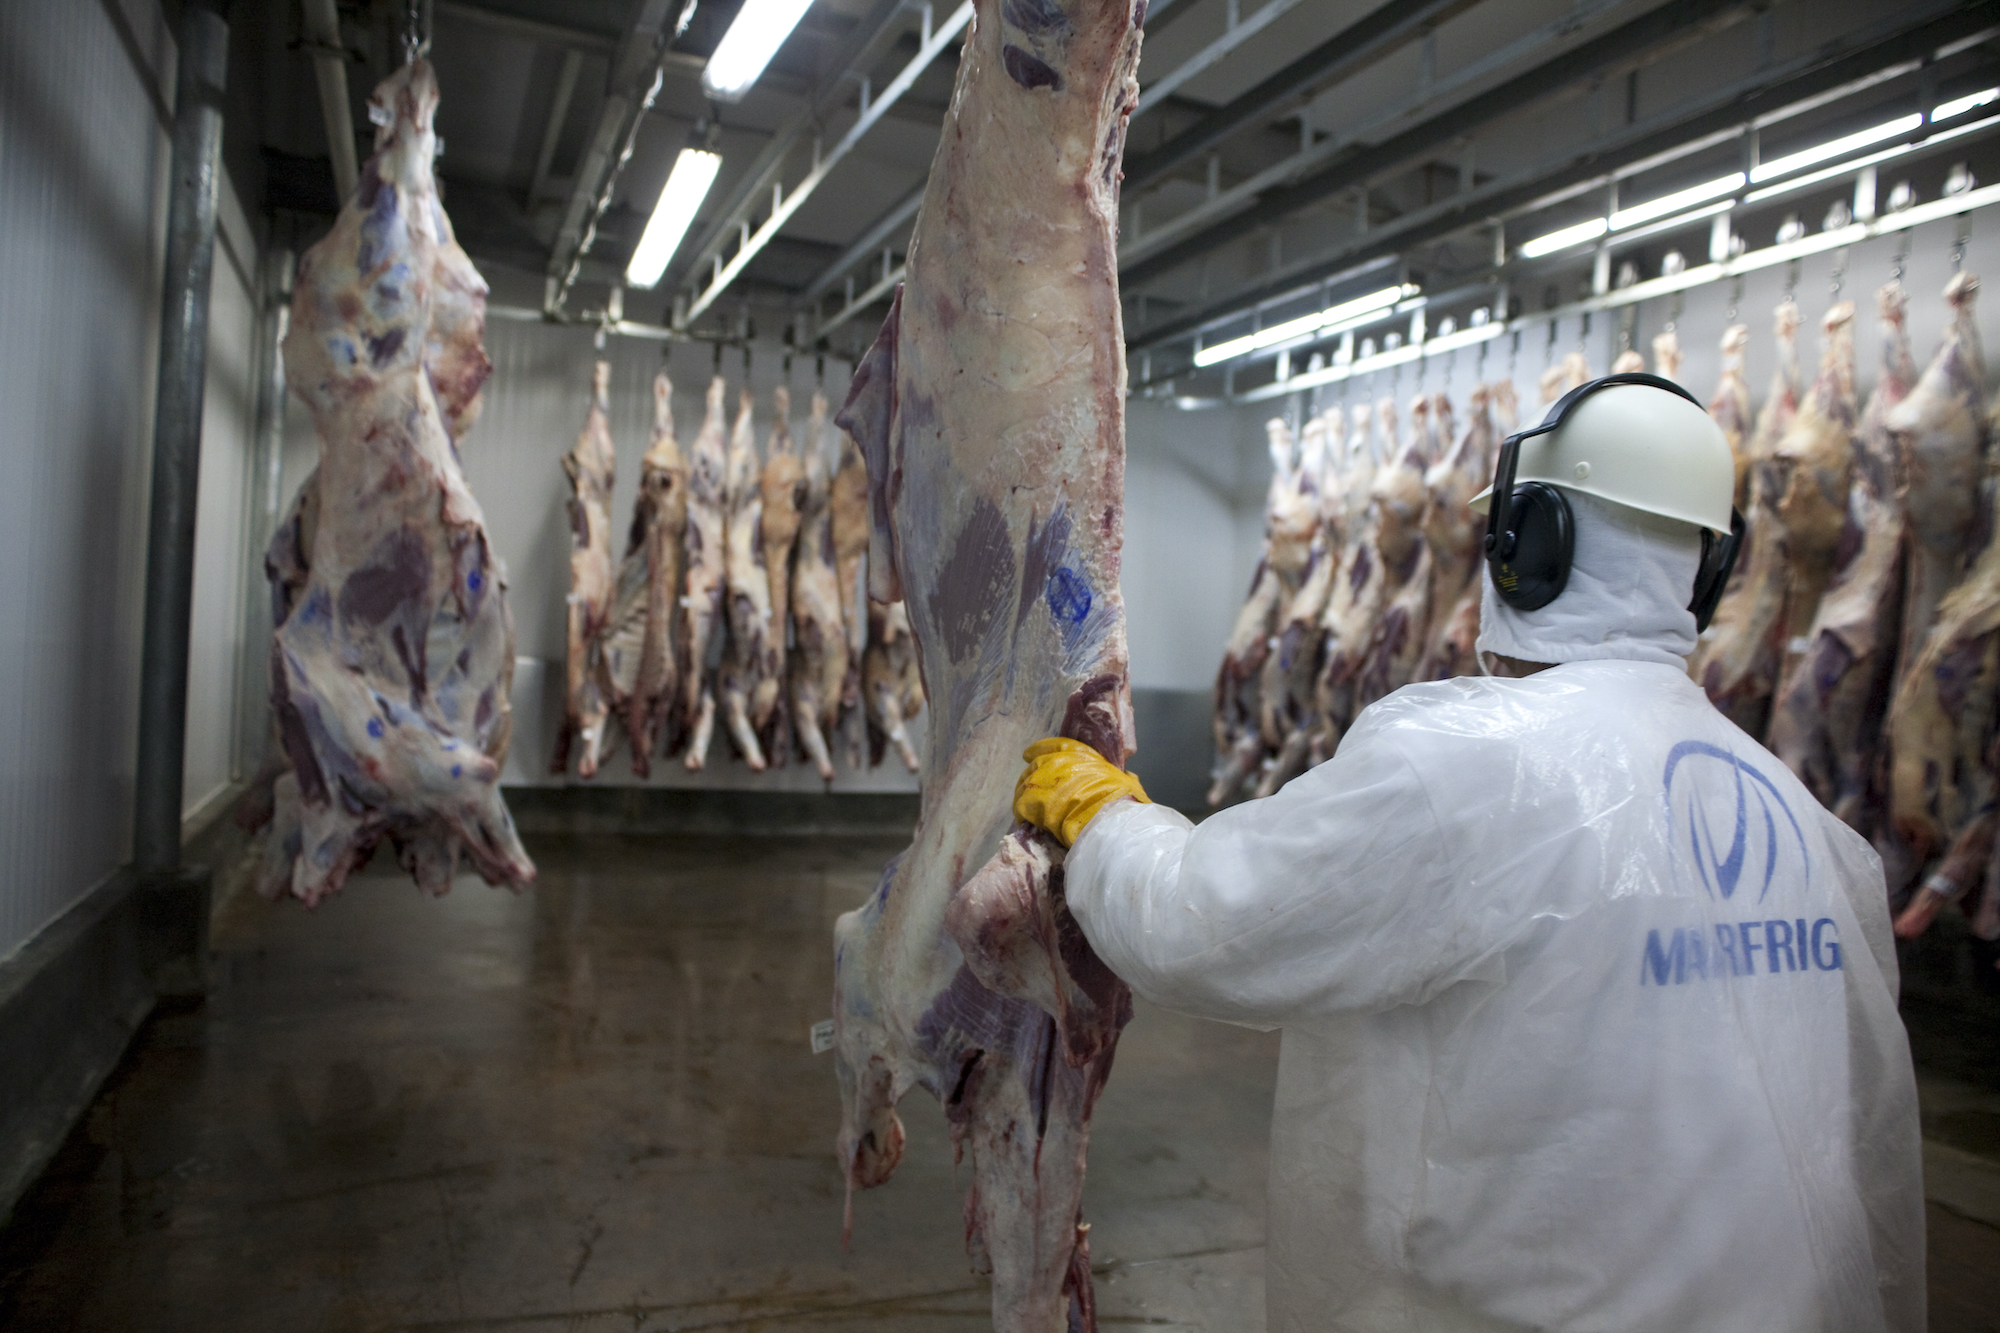 <p>Meat processing companies like JBS and Marfrig recorded record profits in 2019 (Image: <a tabindex="-1" href="https://media.greenpeace.org/C.aspx?VP3=DirectSearch&amp;AID=KWF6MYEQR3M">© Ricardo Funari / Lineair / Greenpeace</a>)</p>